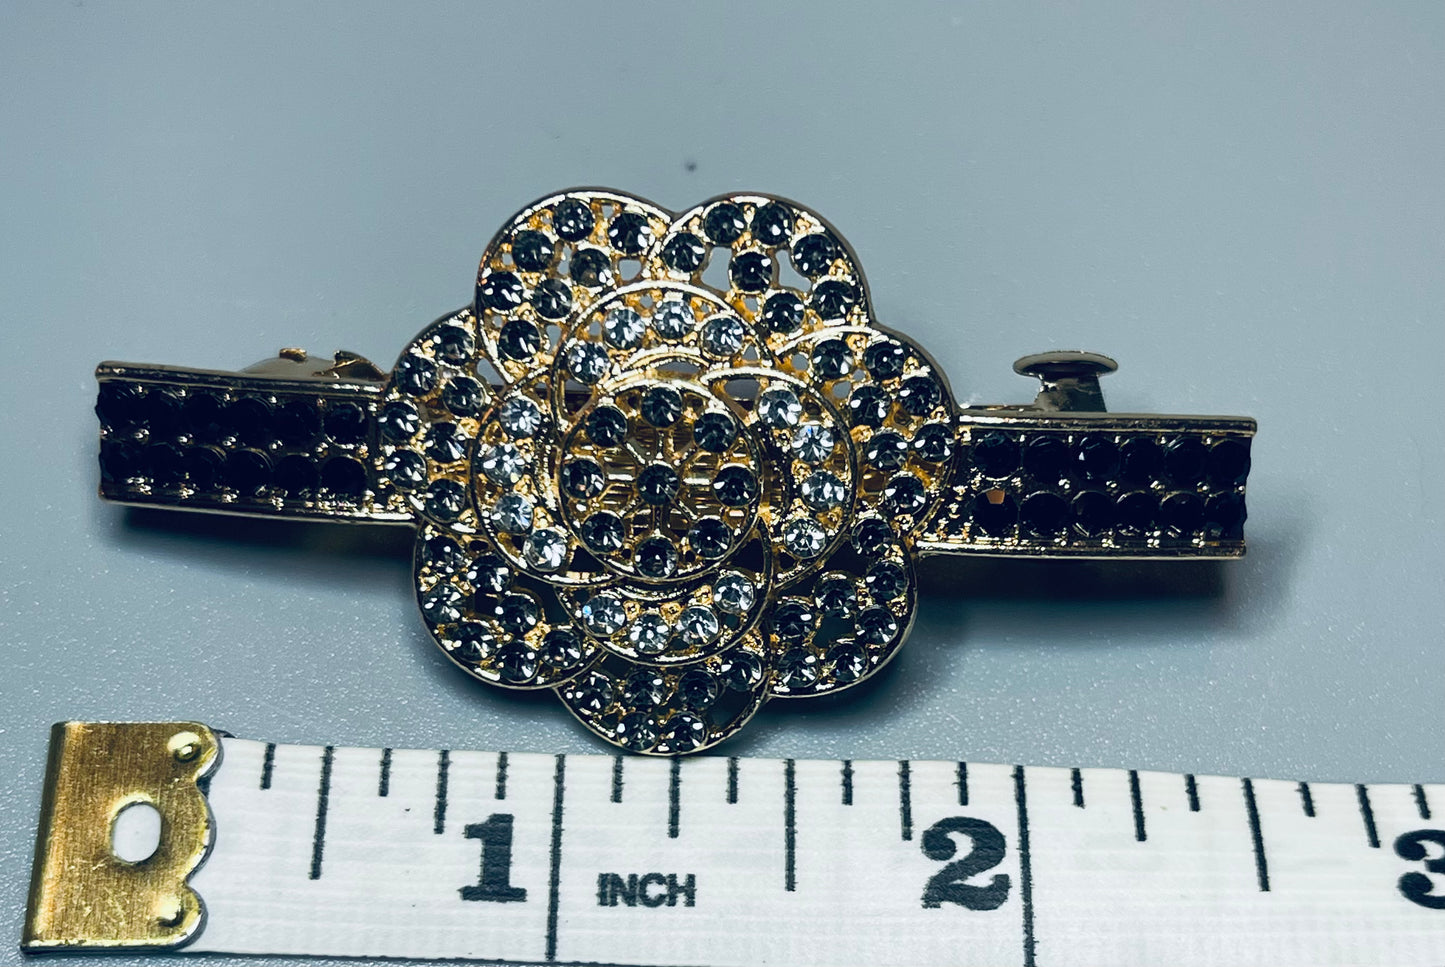 Black gray flower Crystal rhinestone barrette approximately 3.0” gold tone formal hair accessories gift wedding bridesmaid prom birthday mother of bride groom